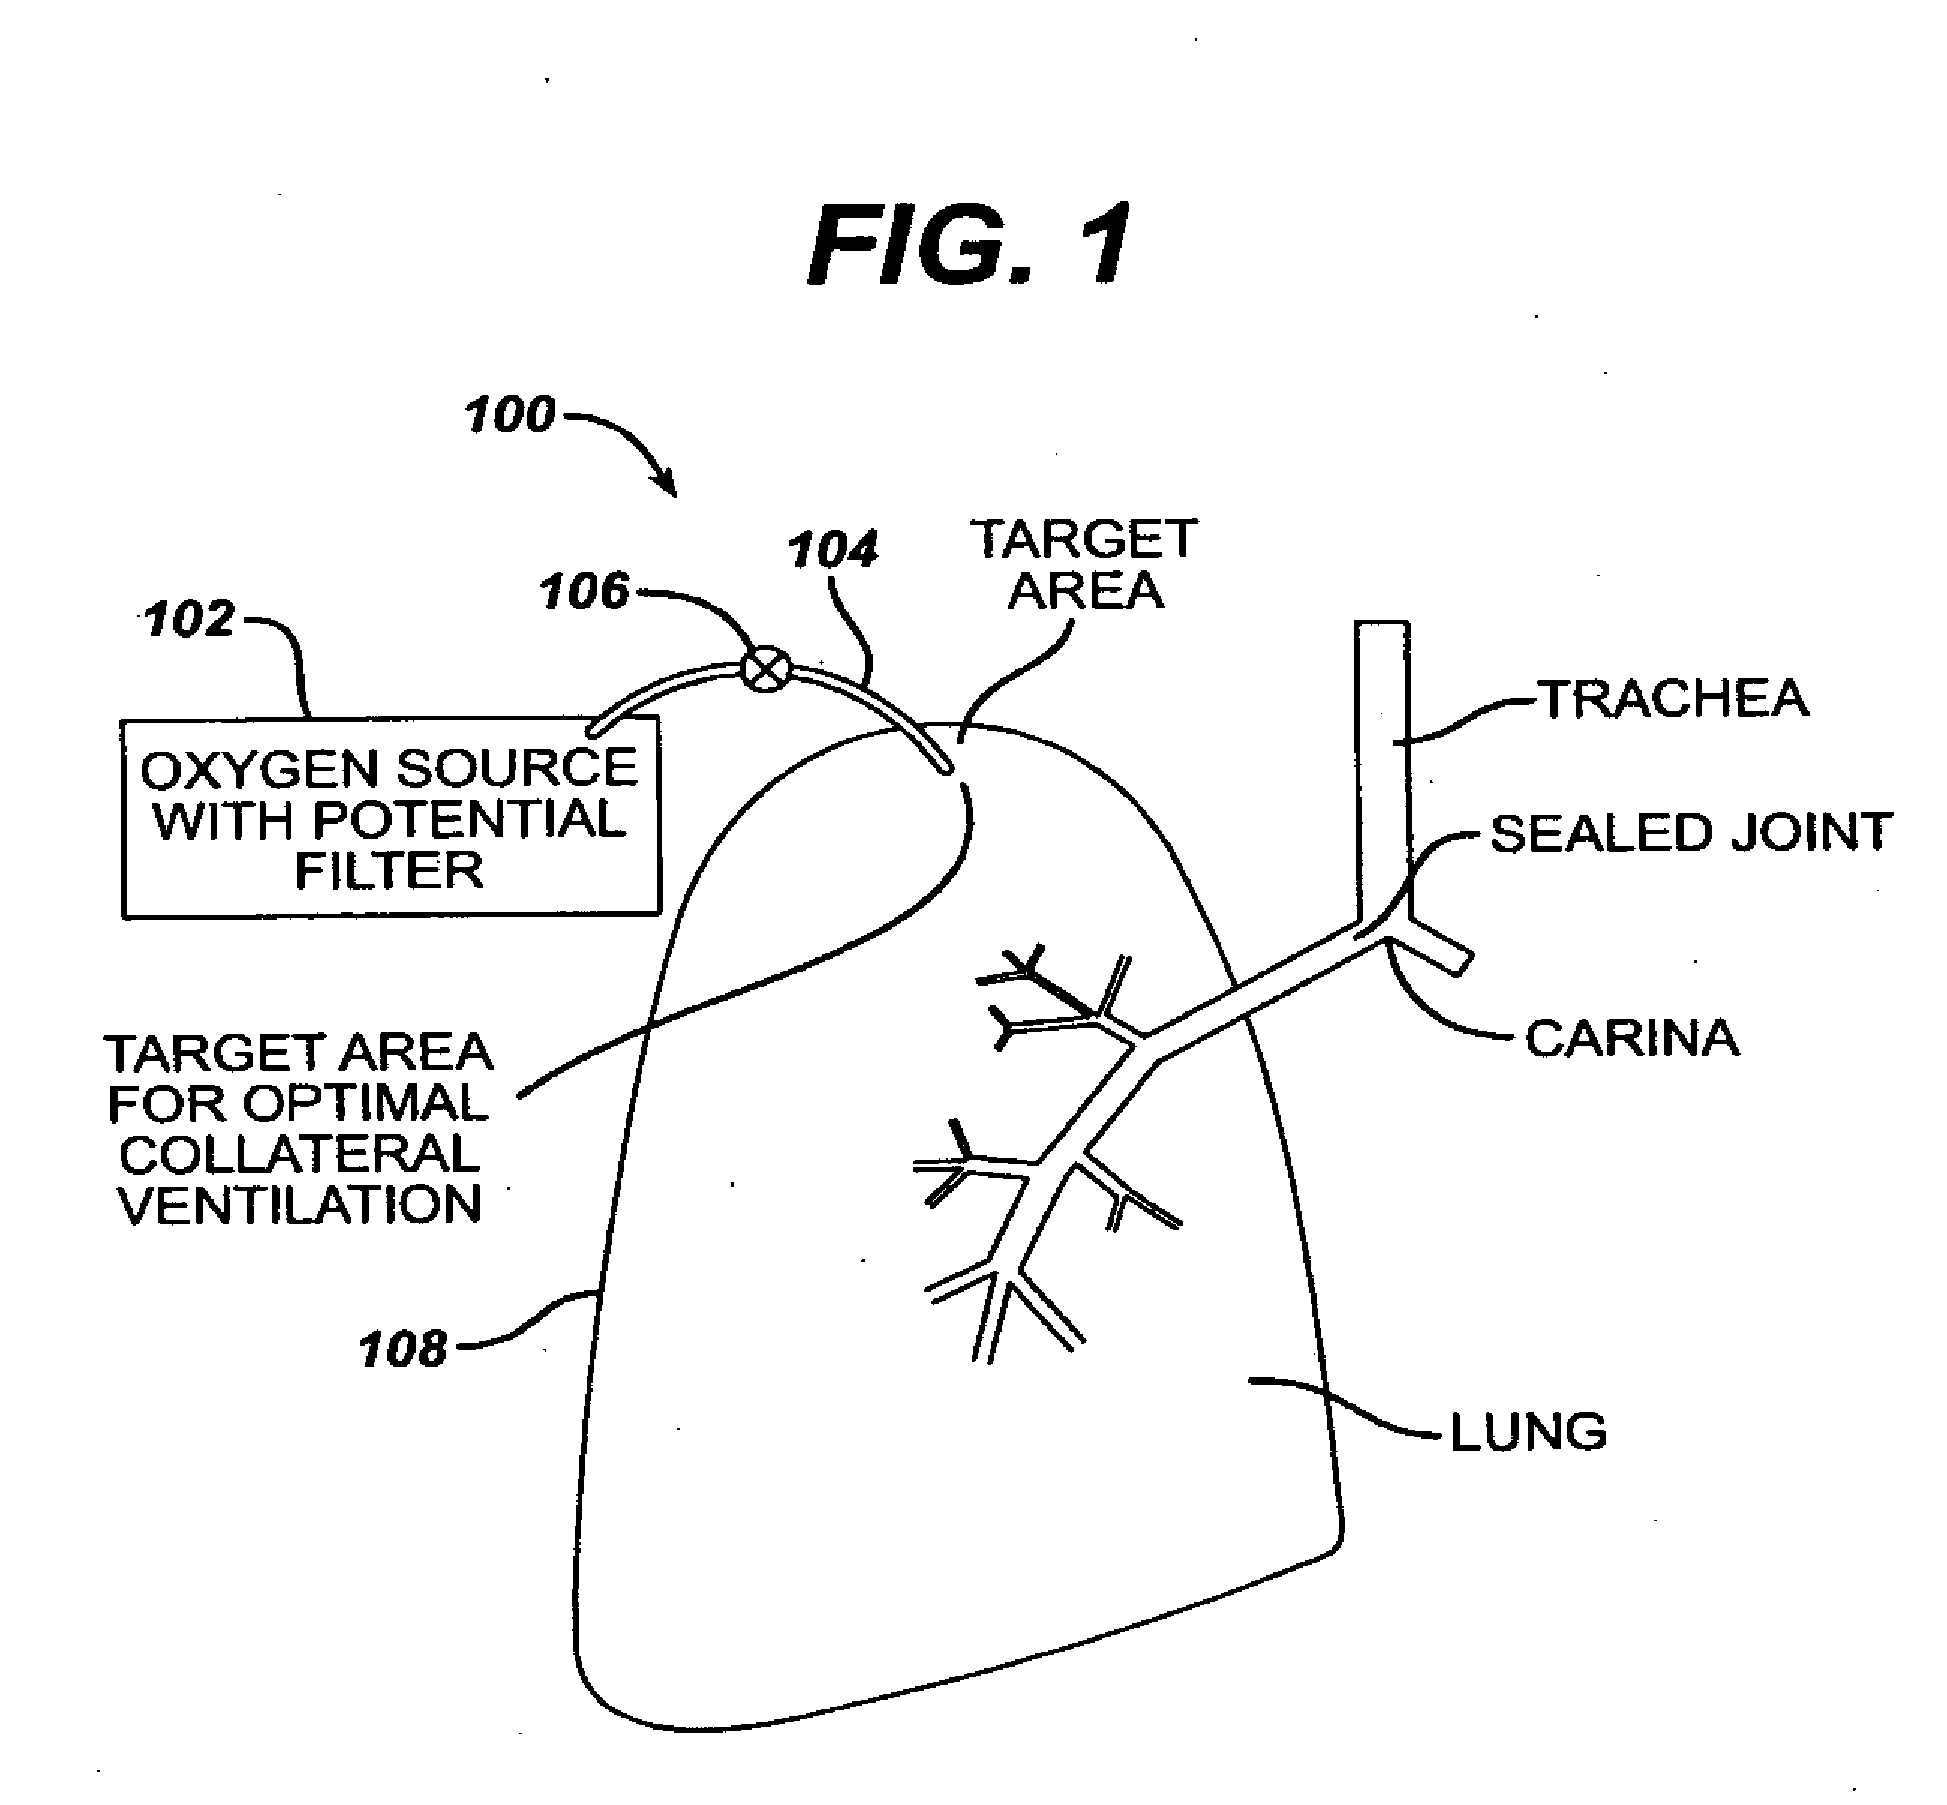 Lung reduction system